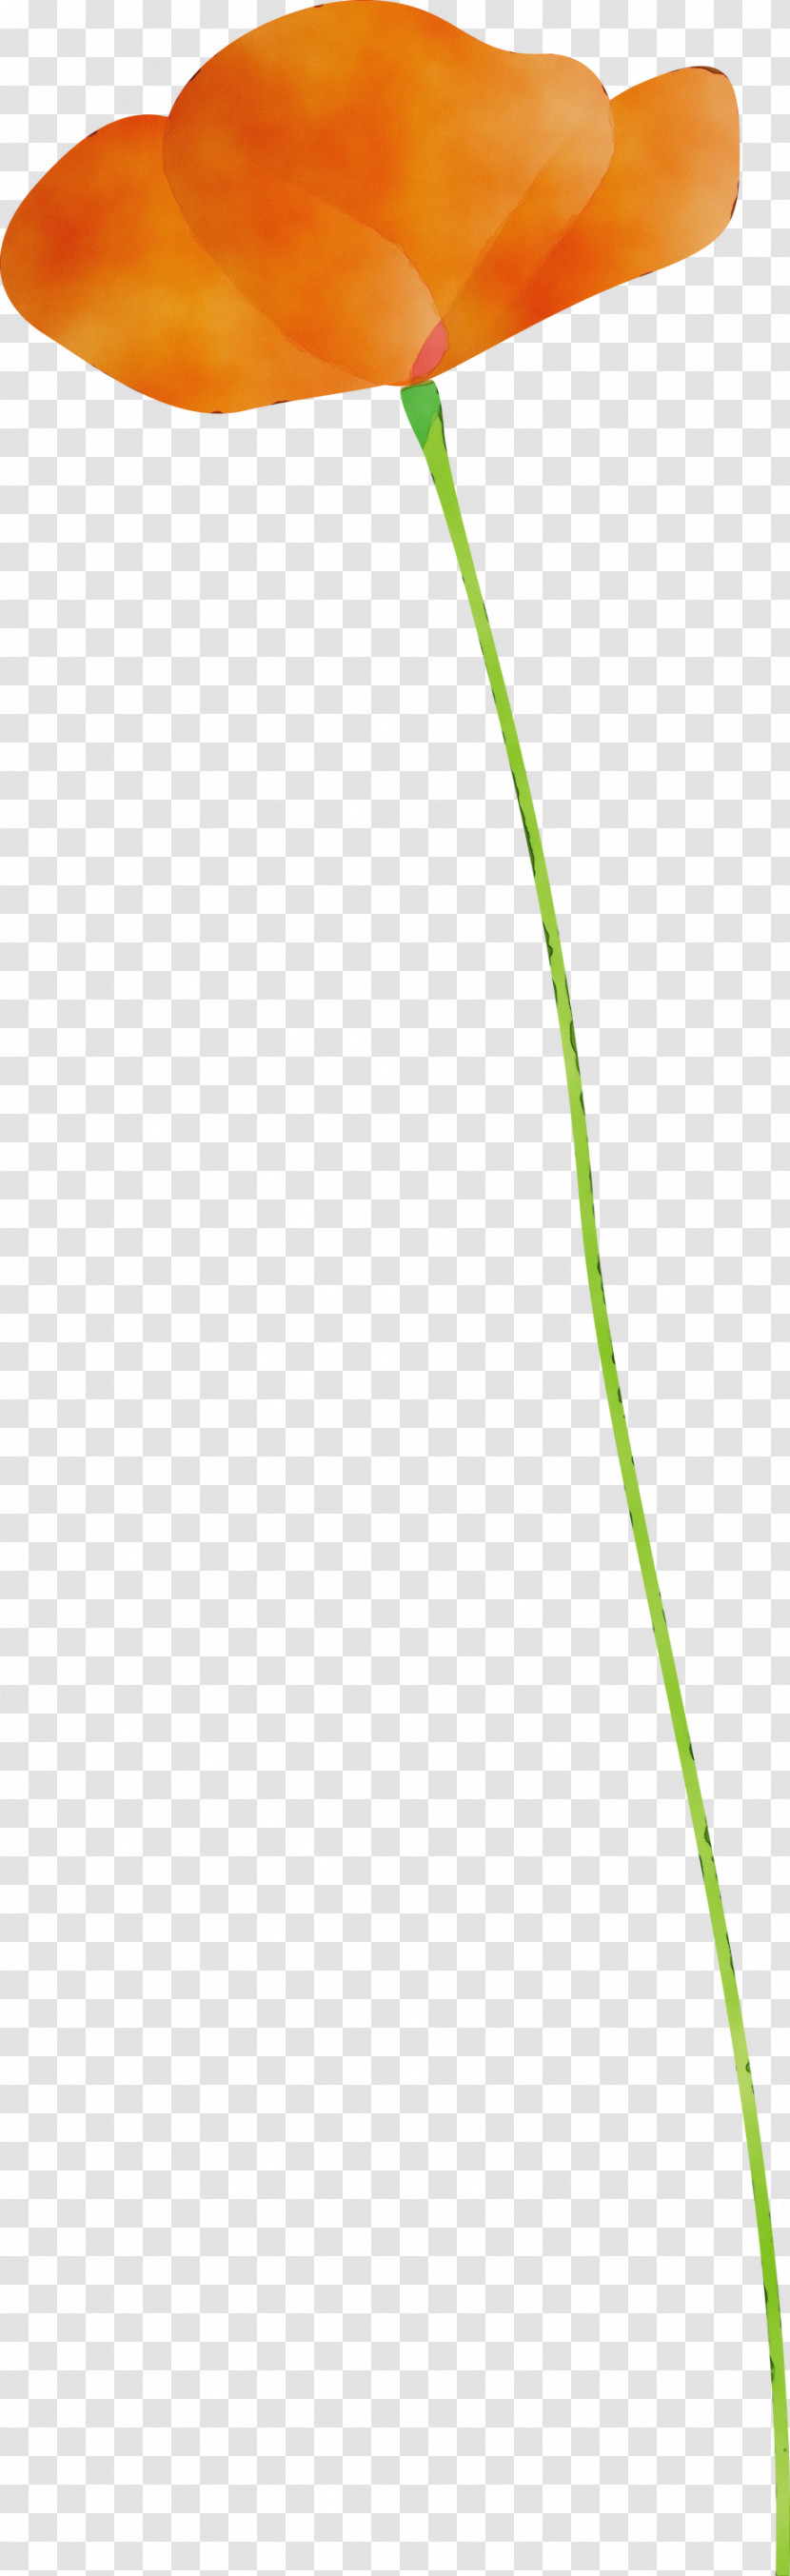 Green Leaf Grass Family Grass Plant Transparent PNG